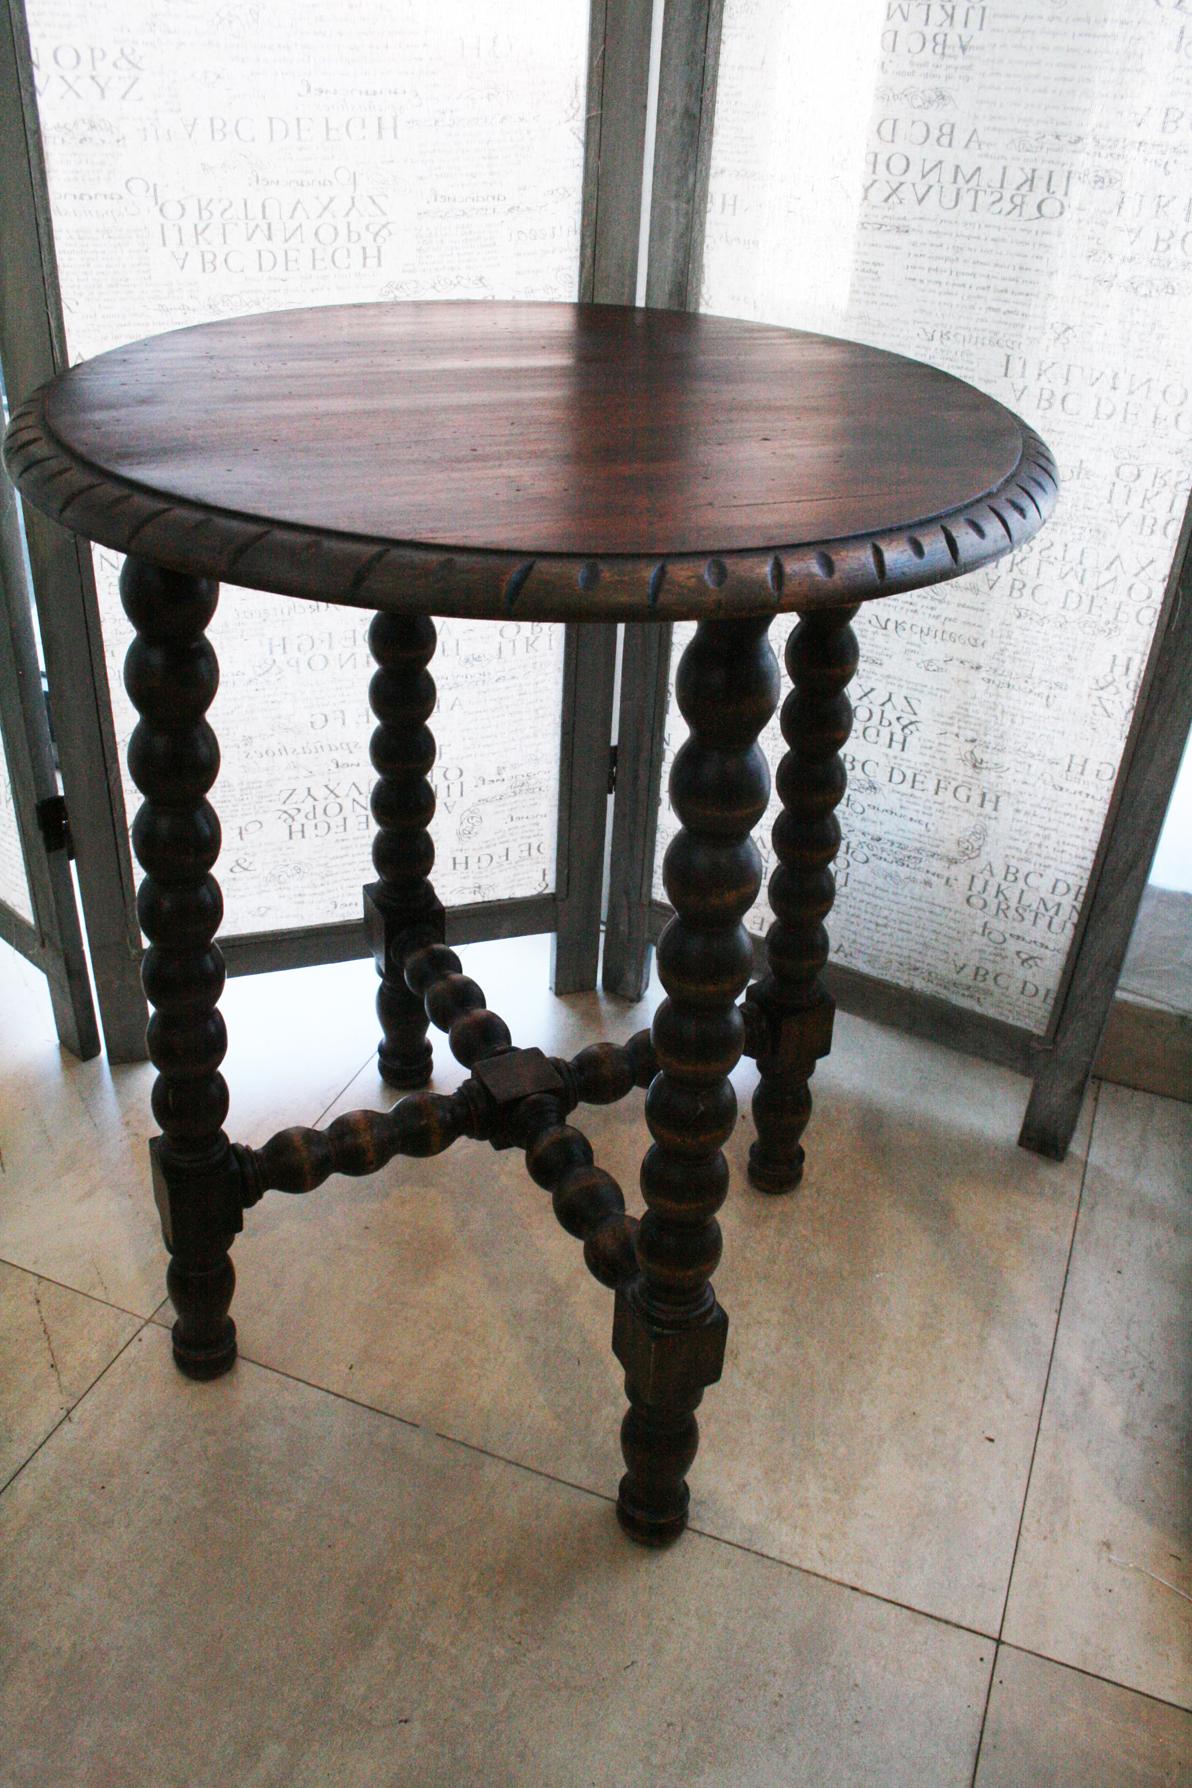 Antique Round Side Table from the 19th Century Wood with Turned Legs 5